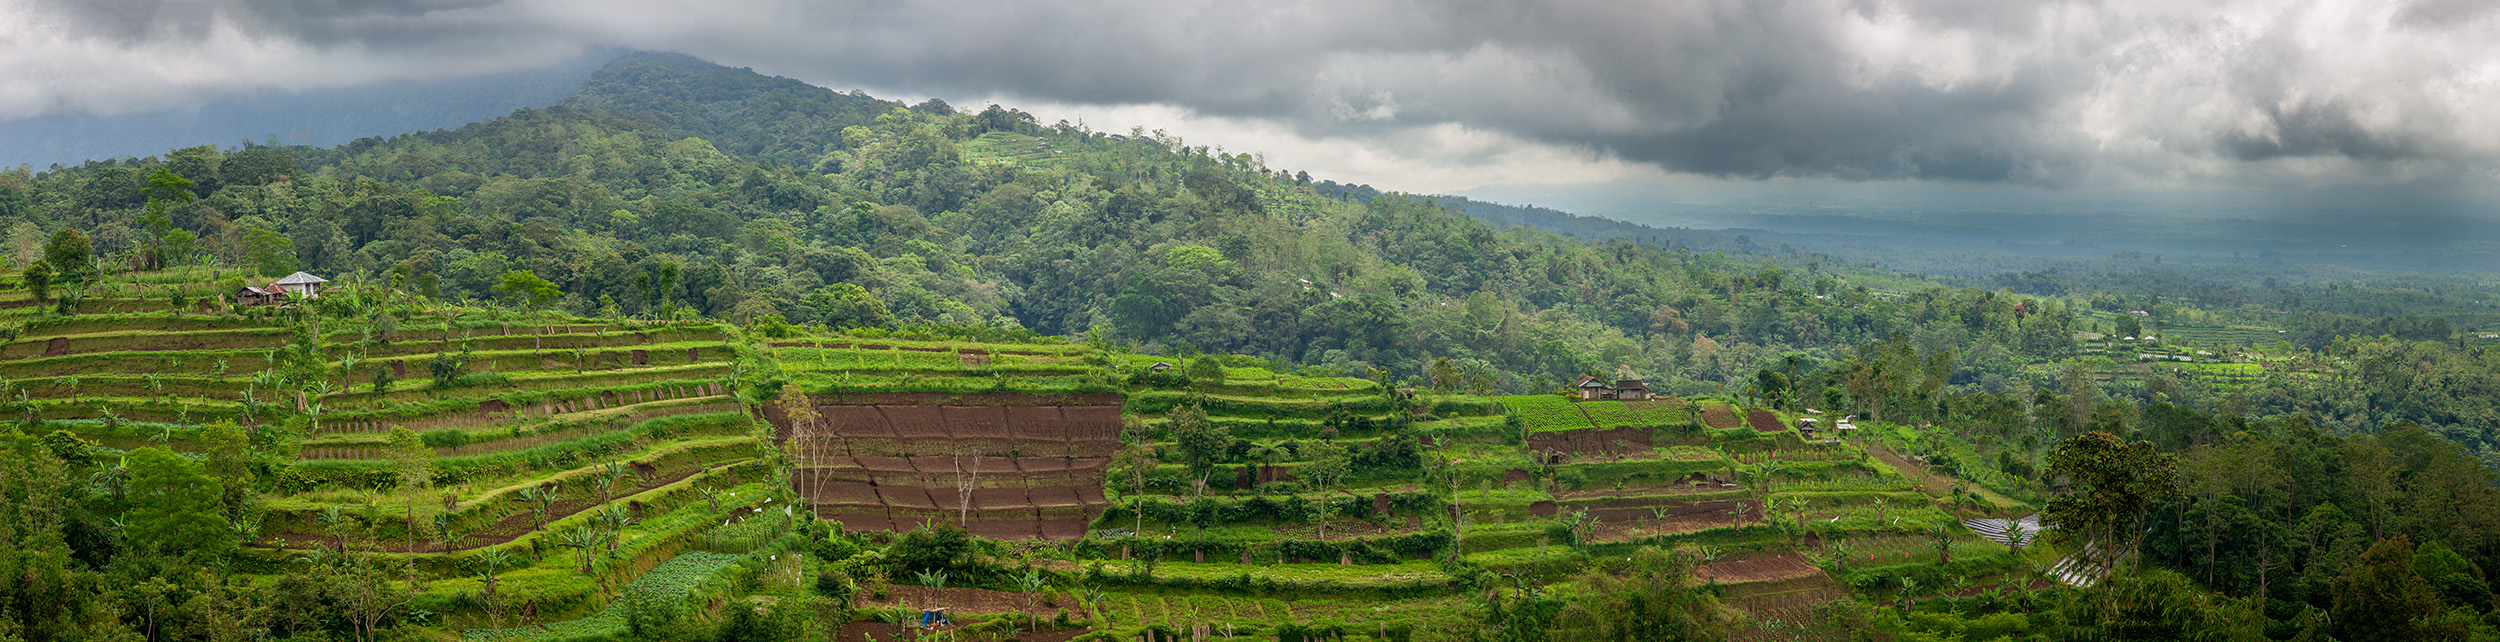 In this panoramic image, an entire hillside transforms into a lush canvas of rice terraces and gardens. Nature's bounty is on...